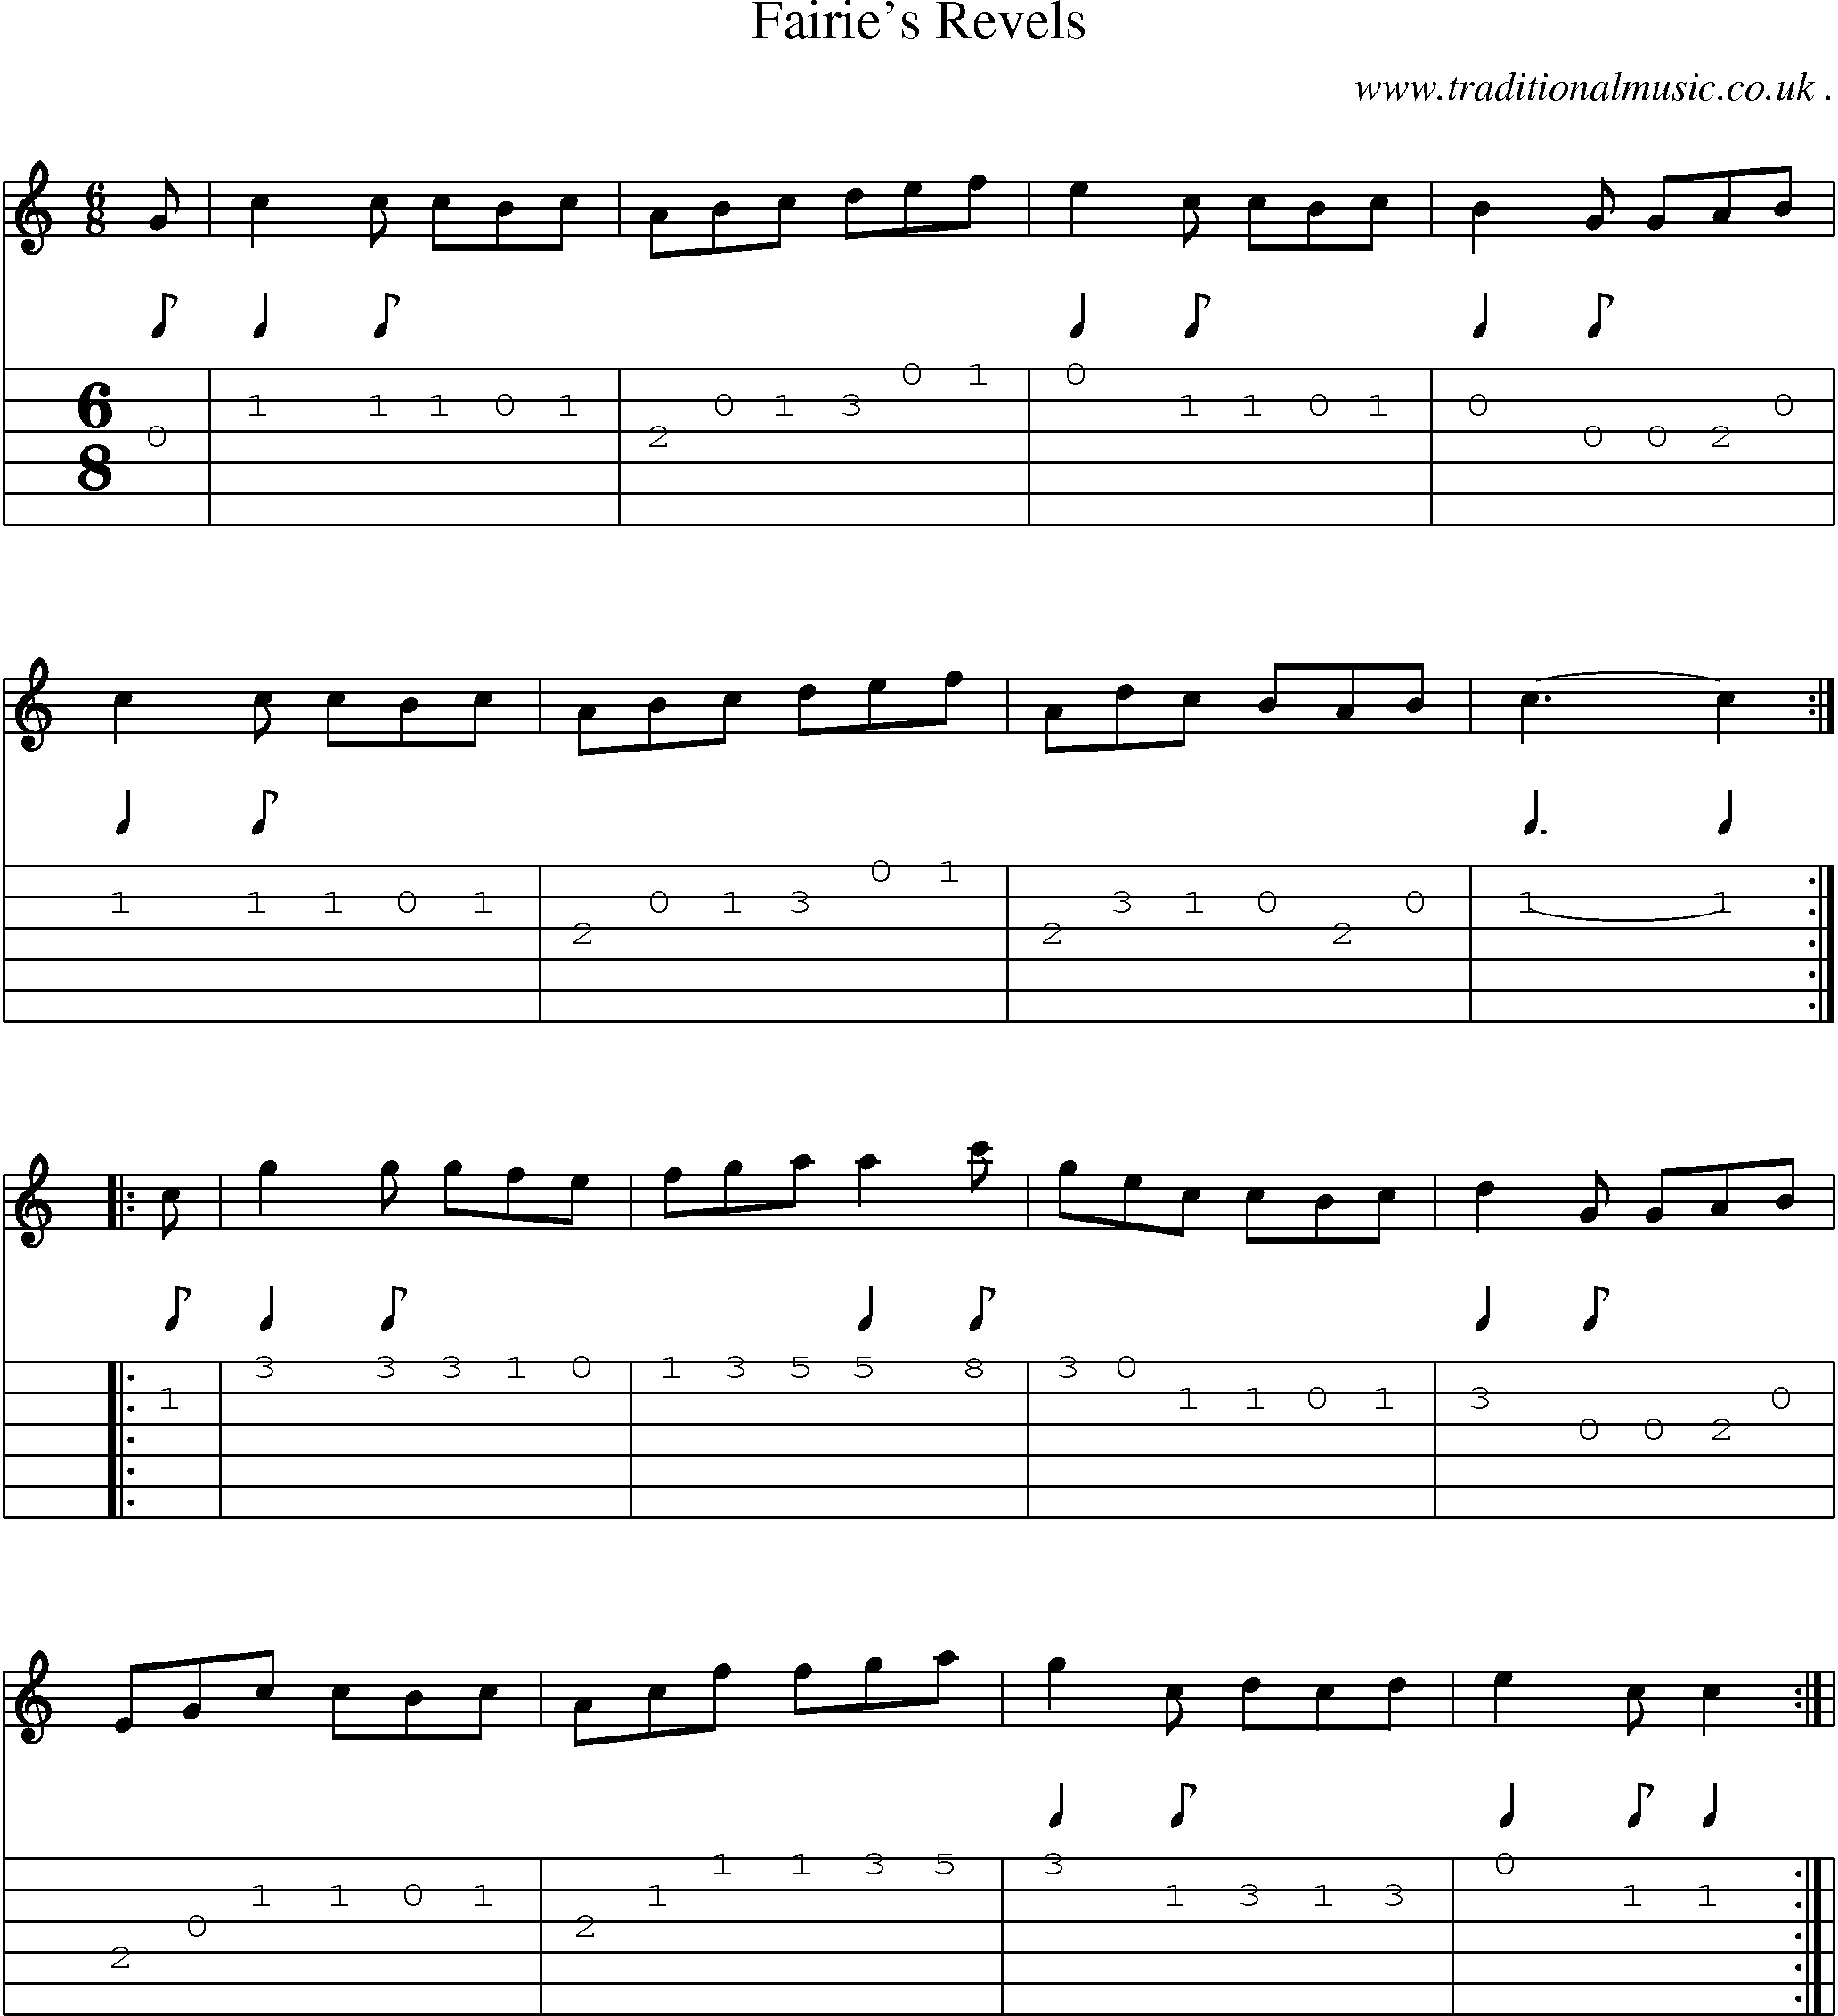 Sheet-Music and Guitar Tabs for Fairies Revels